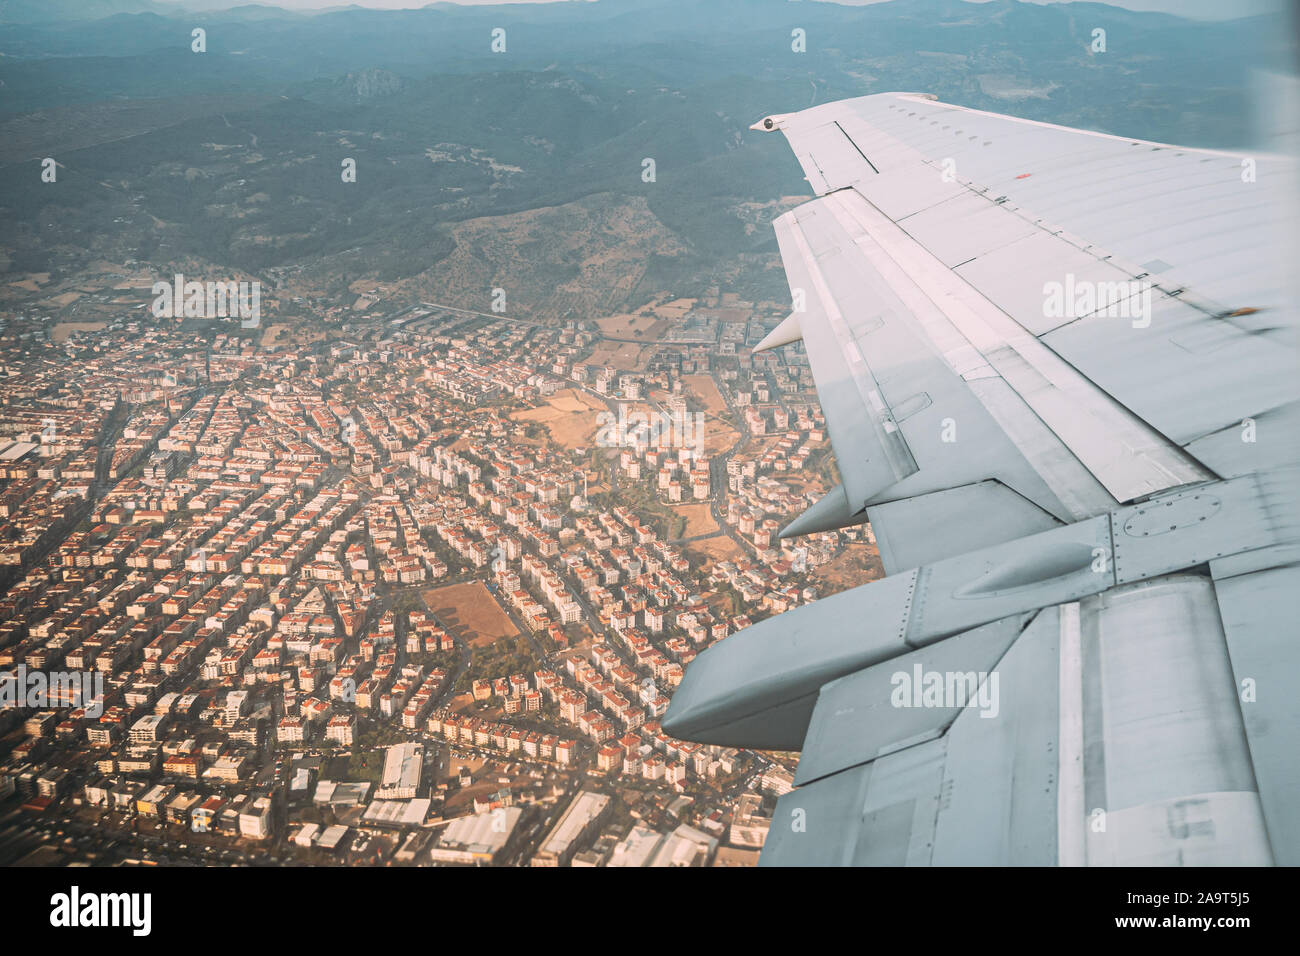 Izmir, Turkey. Beautiful Cityscape Of Turkish Town View From Airplane Window. White Residential Houses On Hillside. Real Estate Suburb In Summer Day. Stock Photo